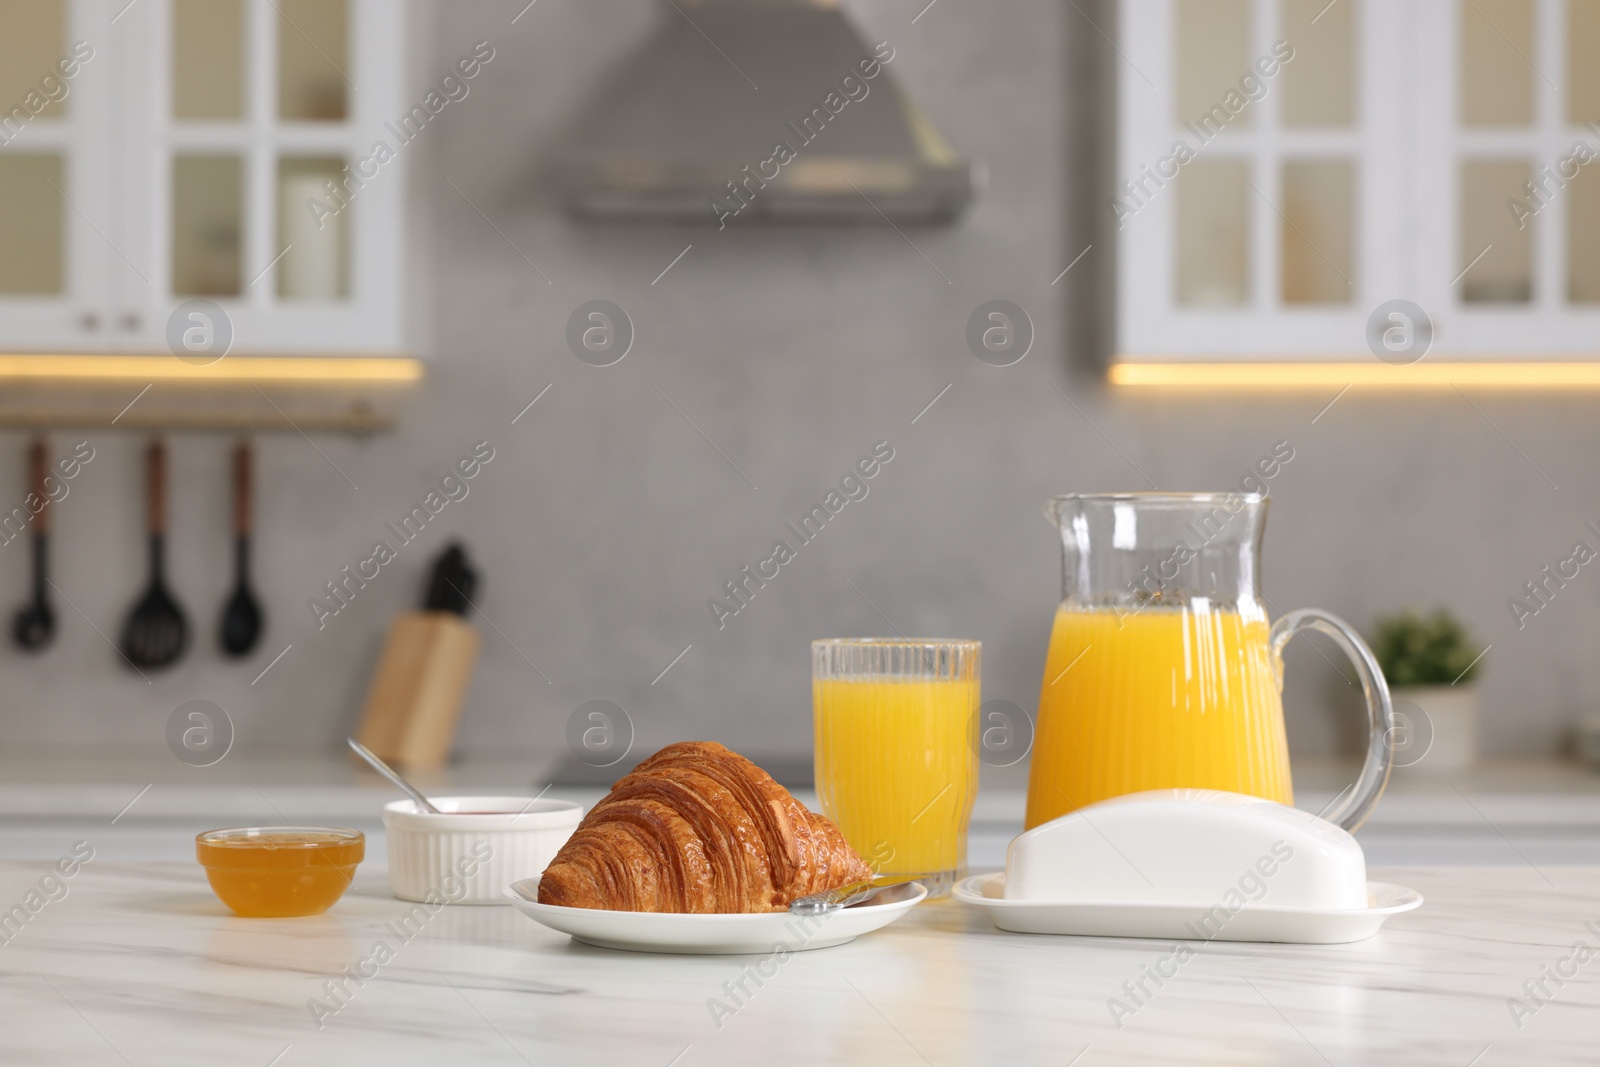 Photo of Breakfast served in kitchen. Fresh croissant, jam, honey and orange juice on white table